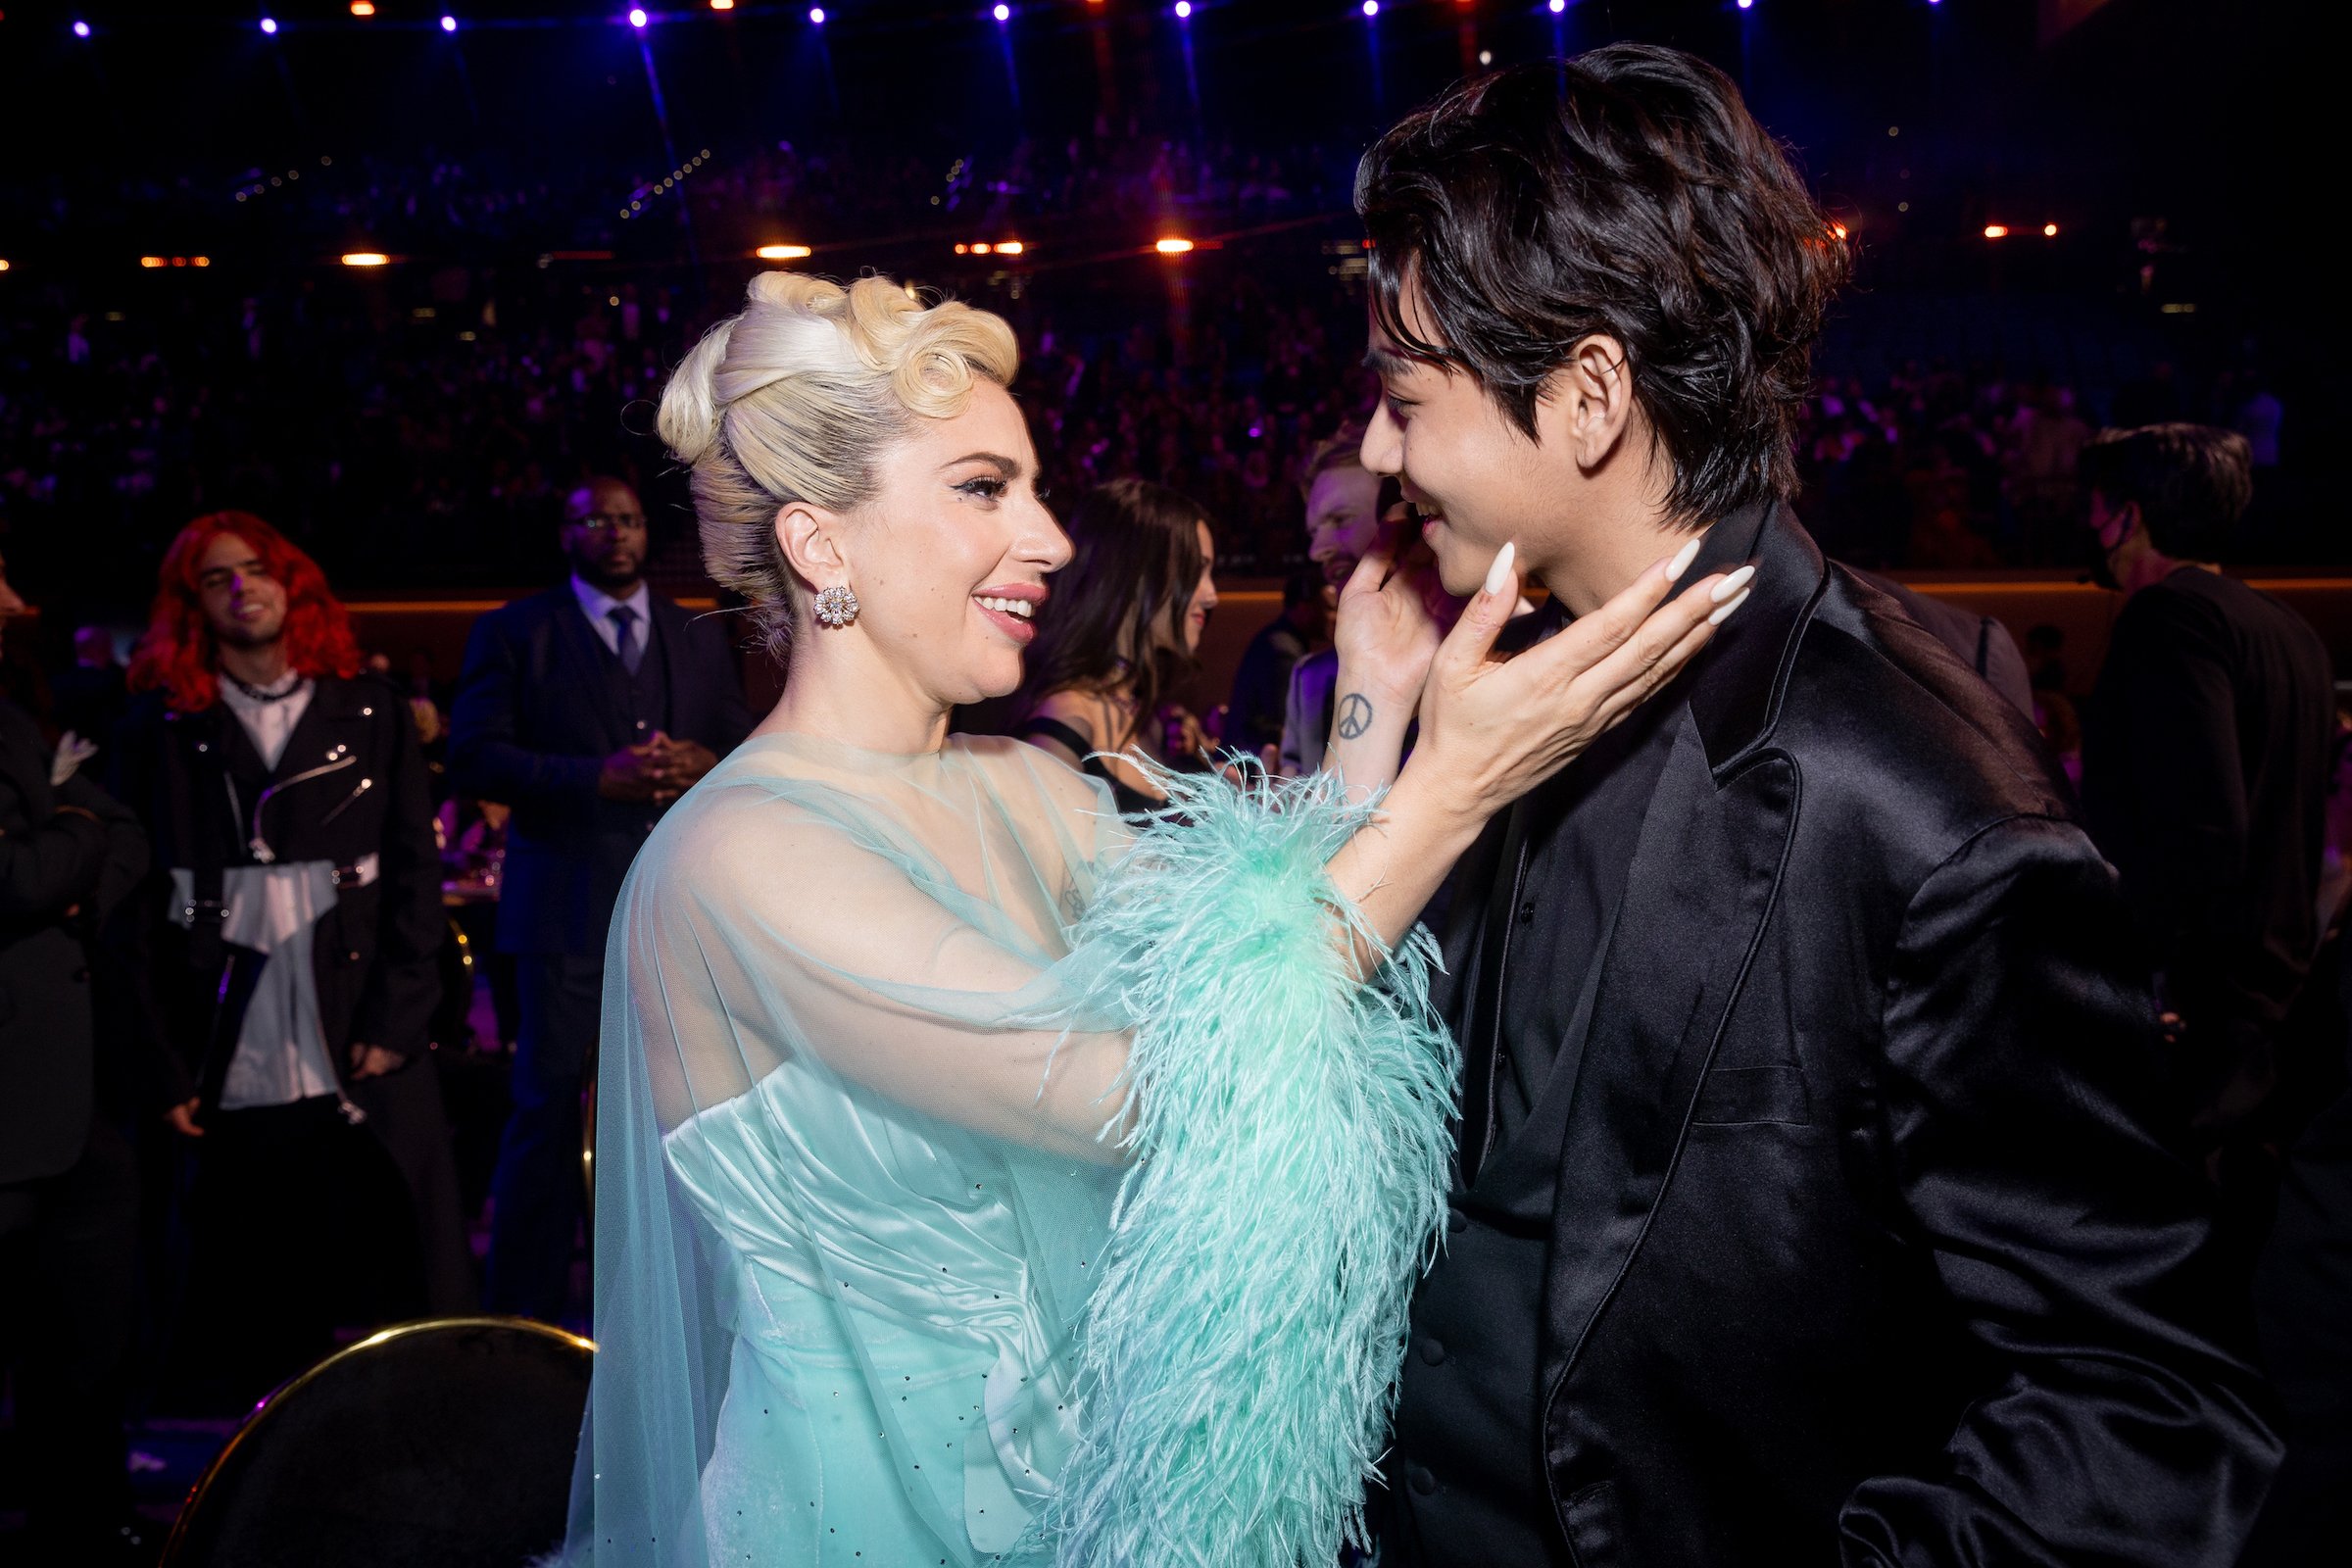 Lady Gaga and V of BTS greeting each other at the Grammys